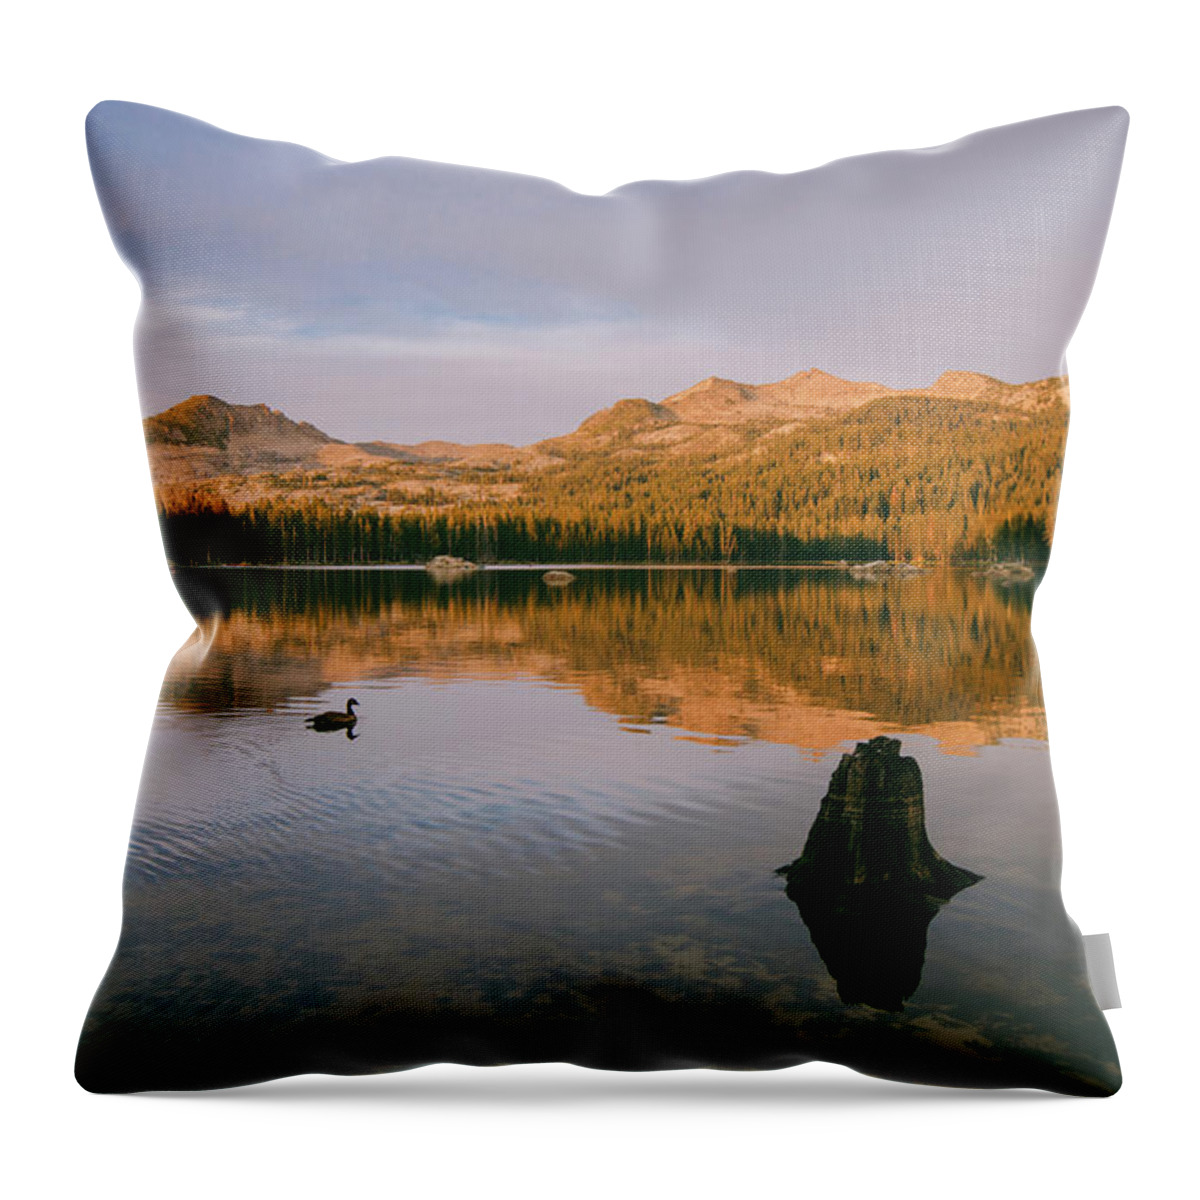 Scenics Throw Pillow featuring the photograph Sunset At Wrights Lake Near Lake Tahoe by Steve Hymon